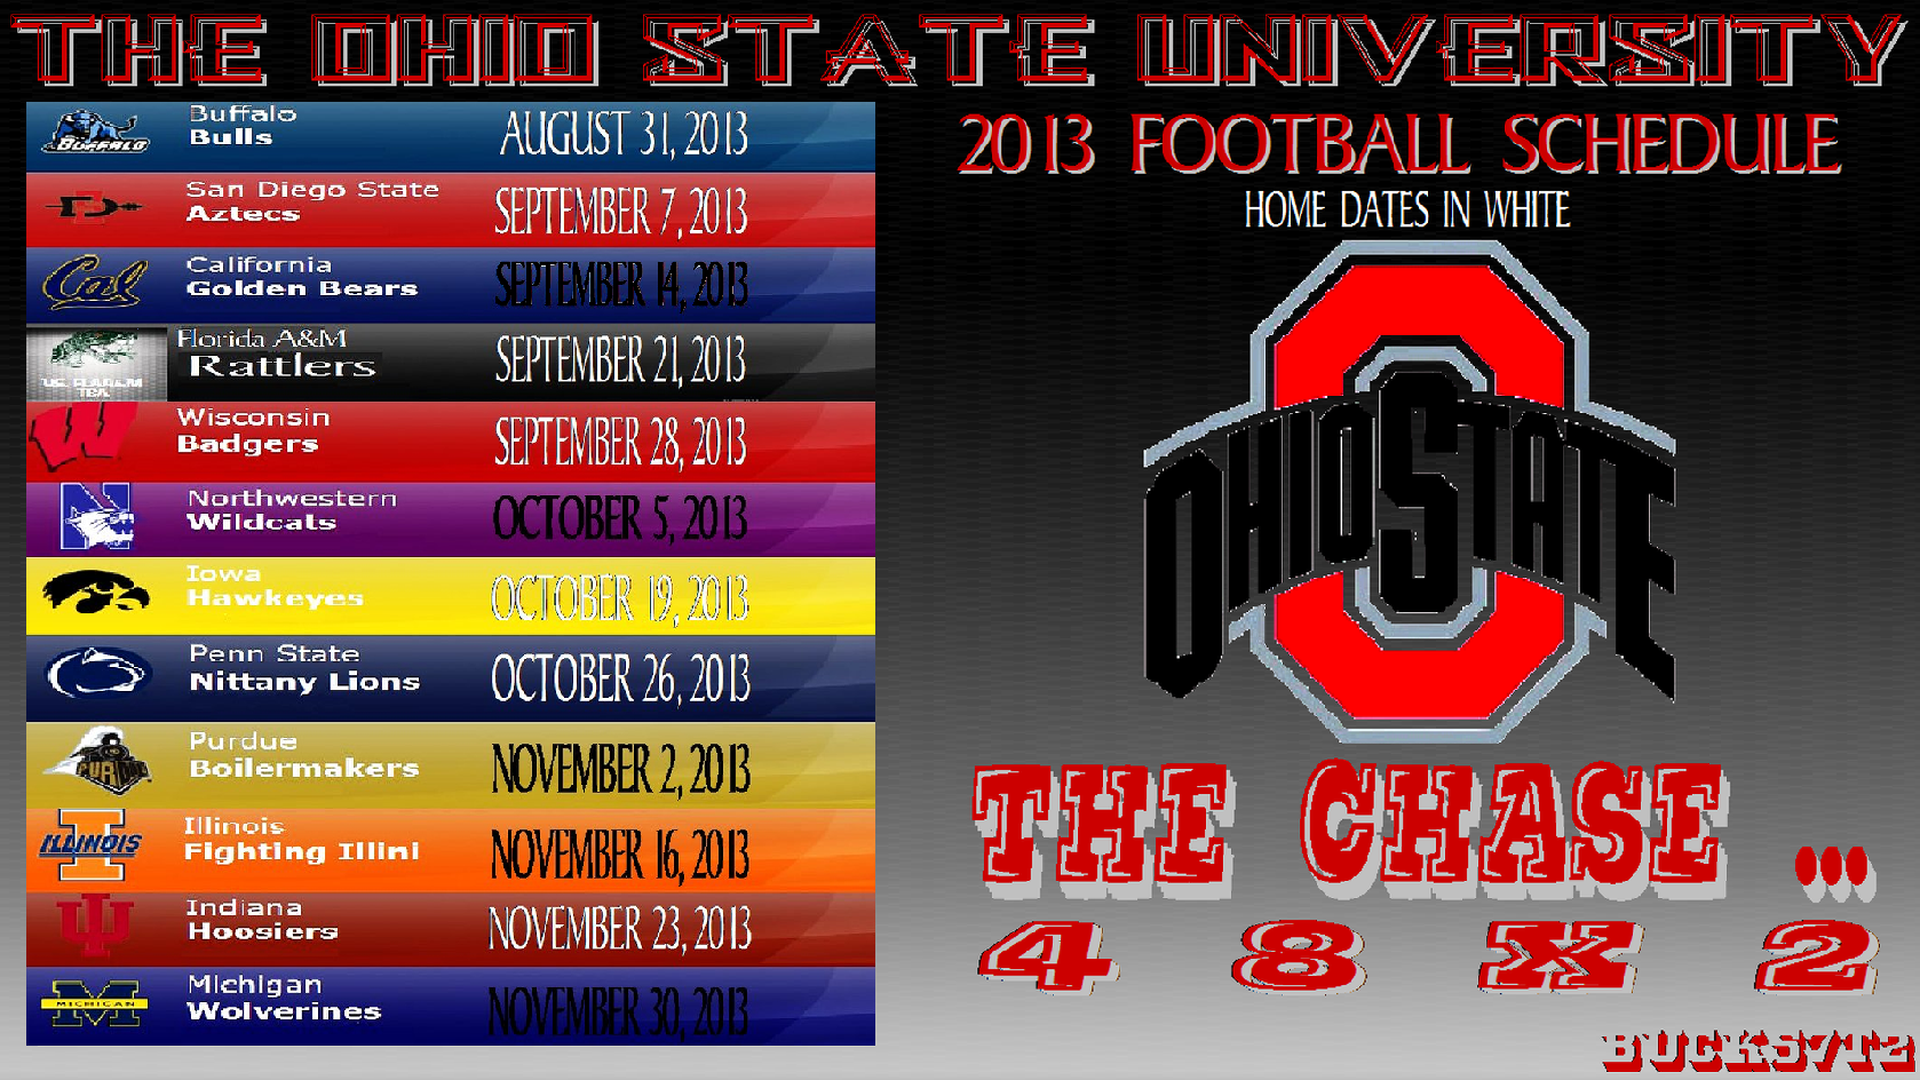 2013 Ohio State Buckeyes Football Schedule - Football Cool Penn State Backgrounds - HD Wallpaper 